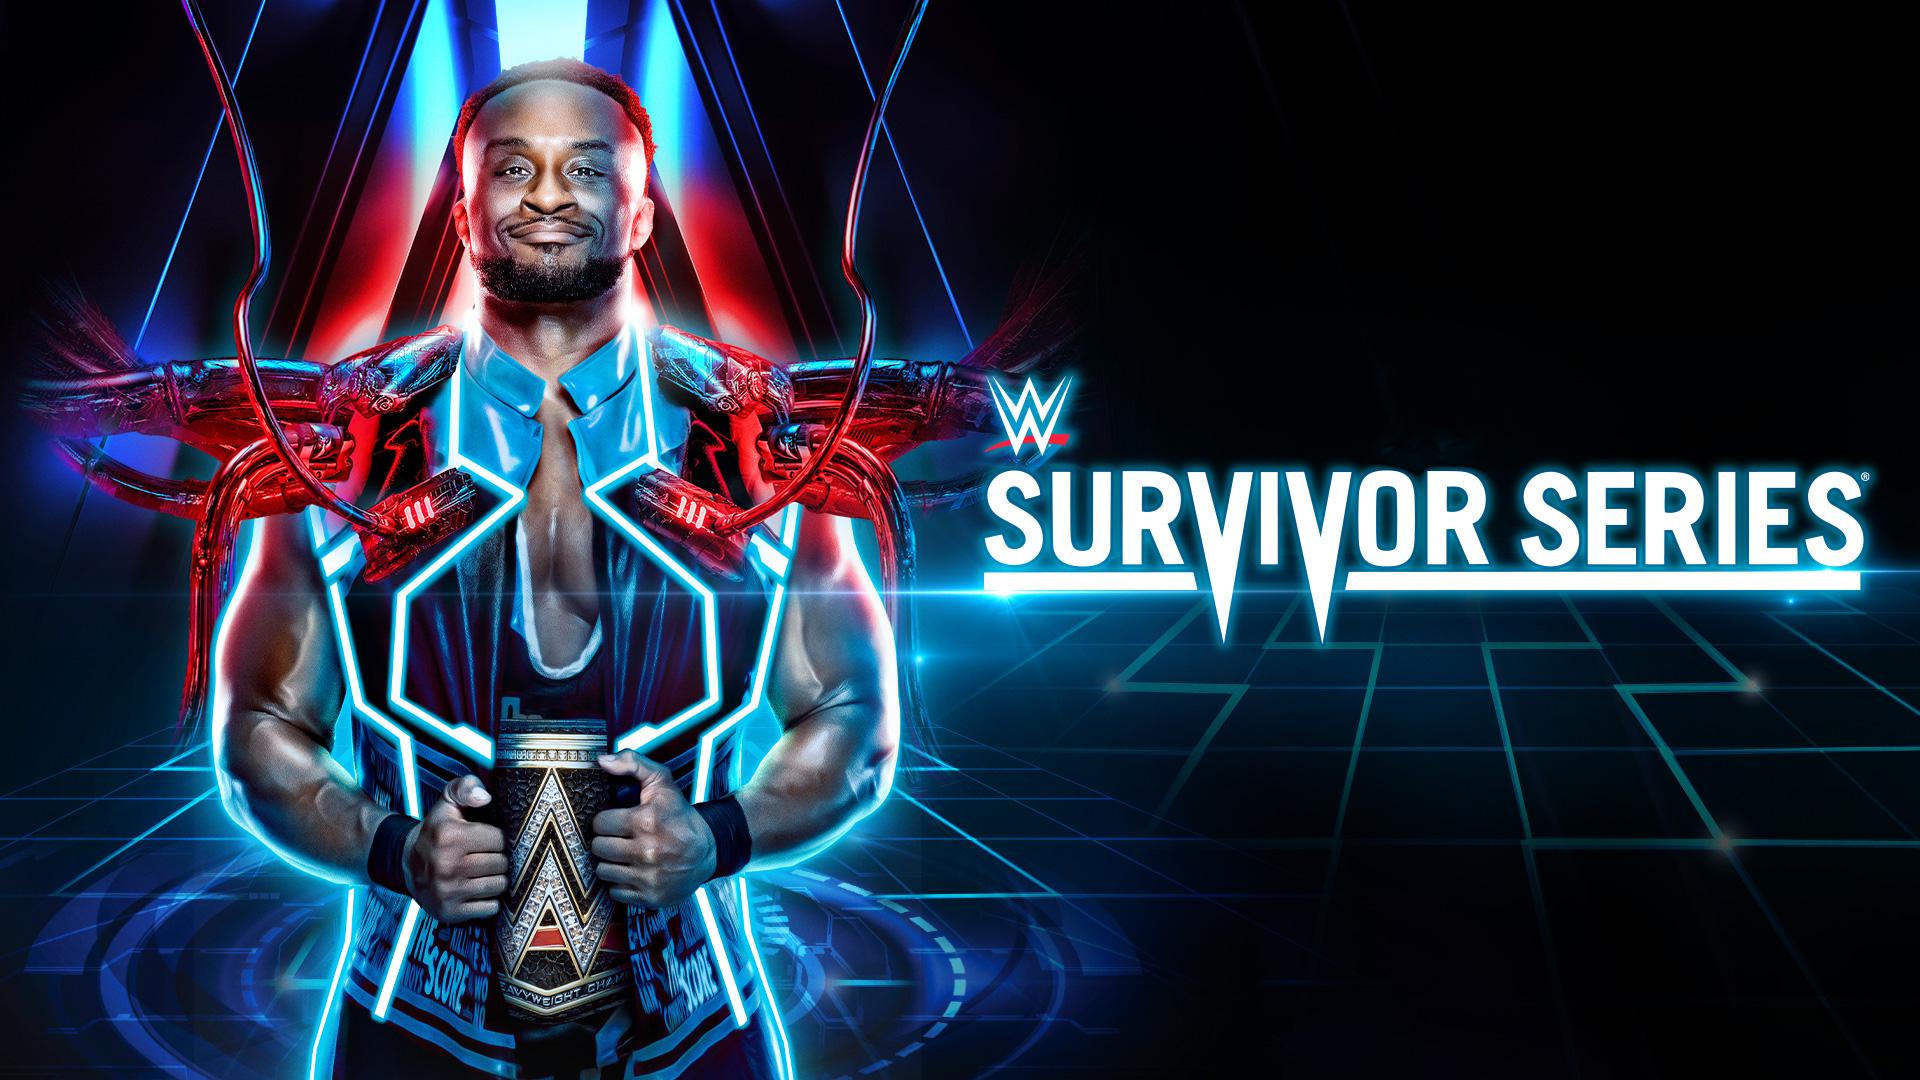 WWE Survivor Series 2021: All you need to know about Survivor Series